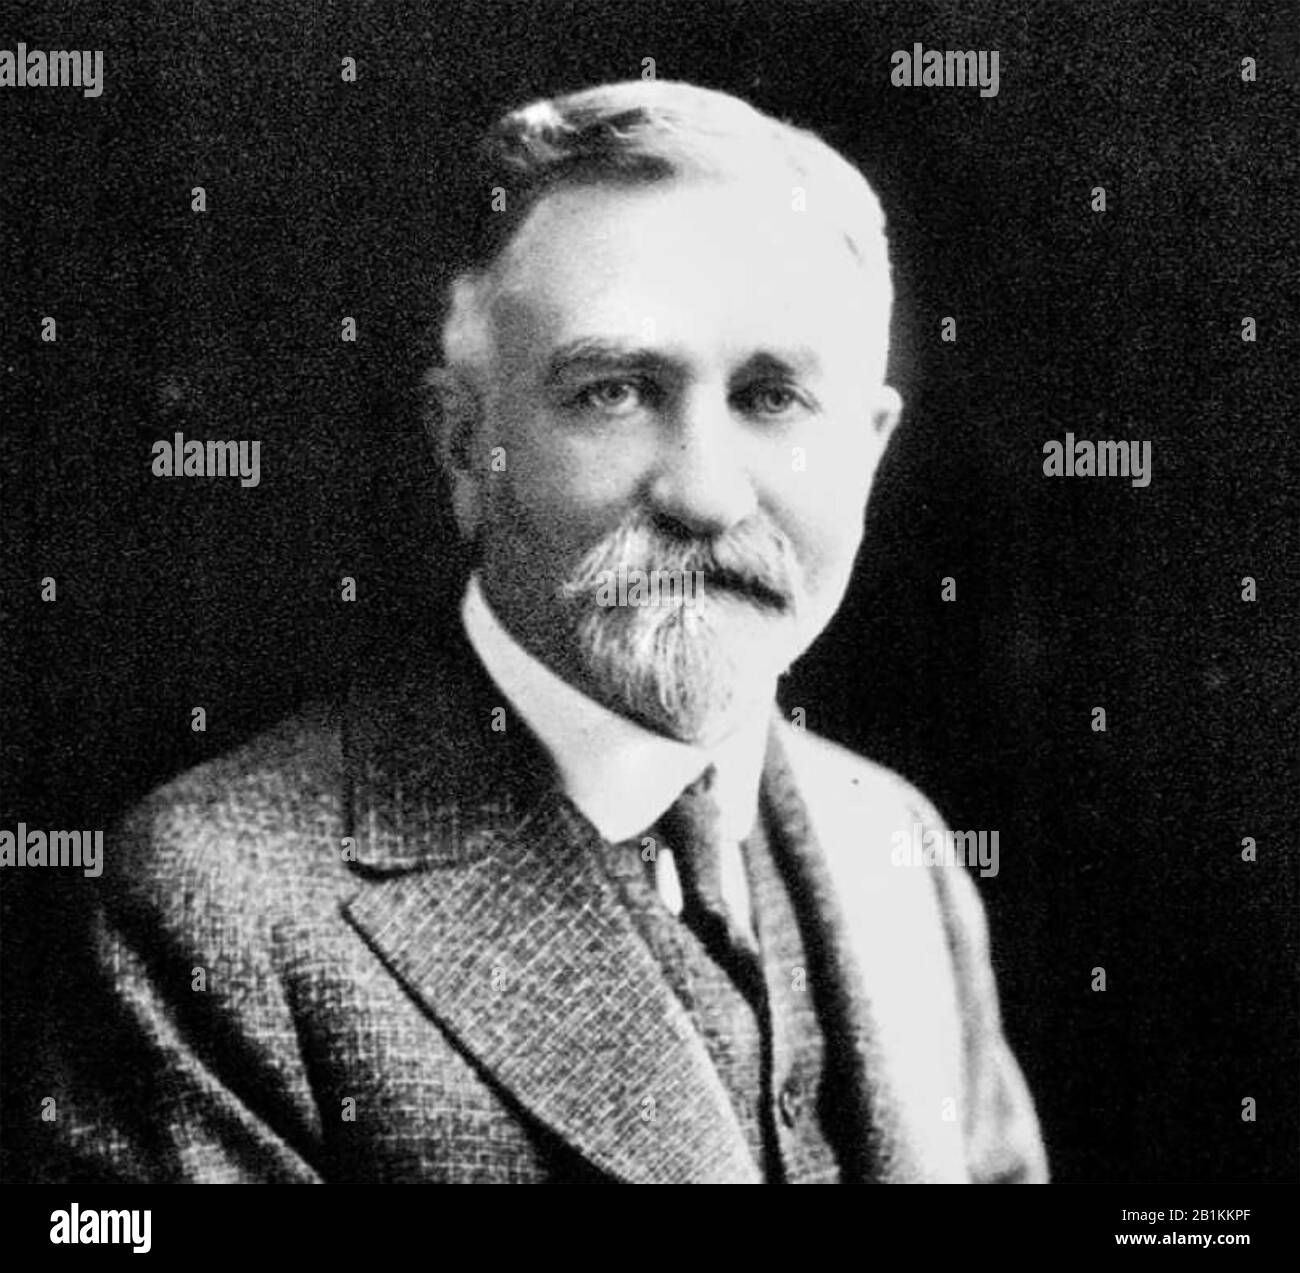 HERBERT DOW (1866-1930) Canadian-born American chemical industrialist who founded Dow Chemical. Stock Photo